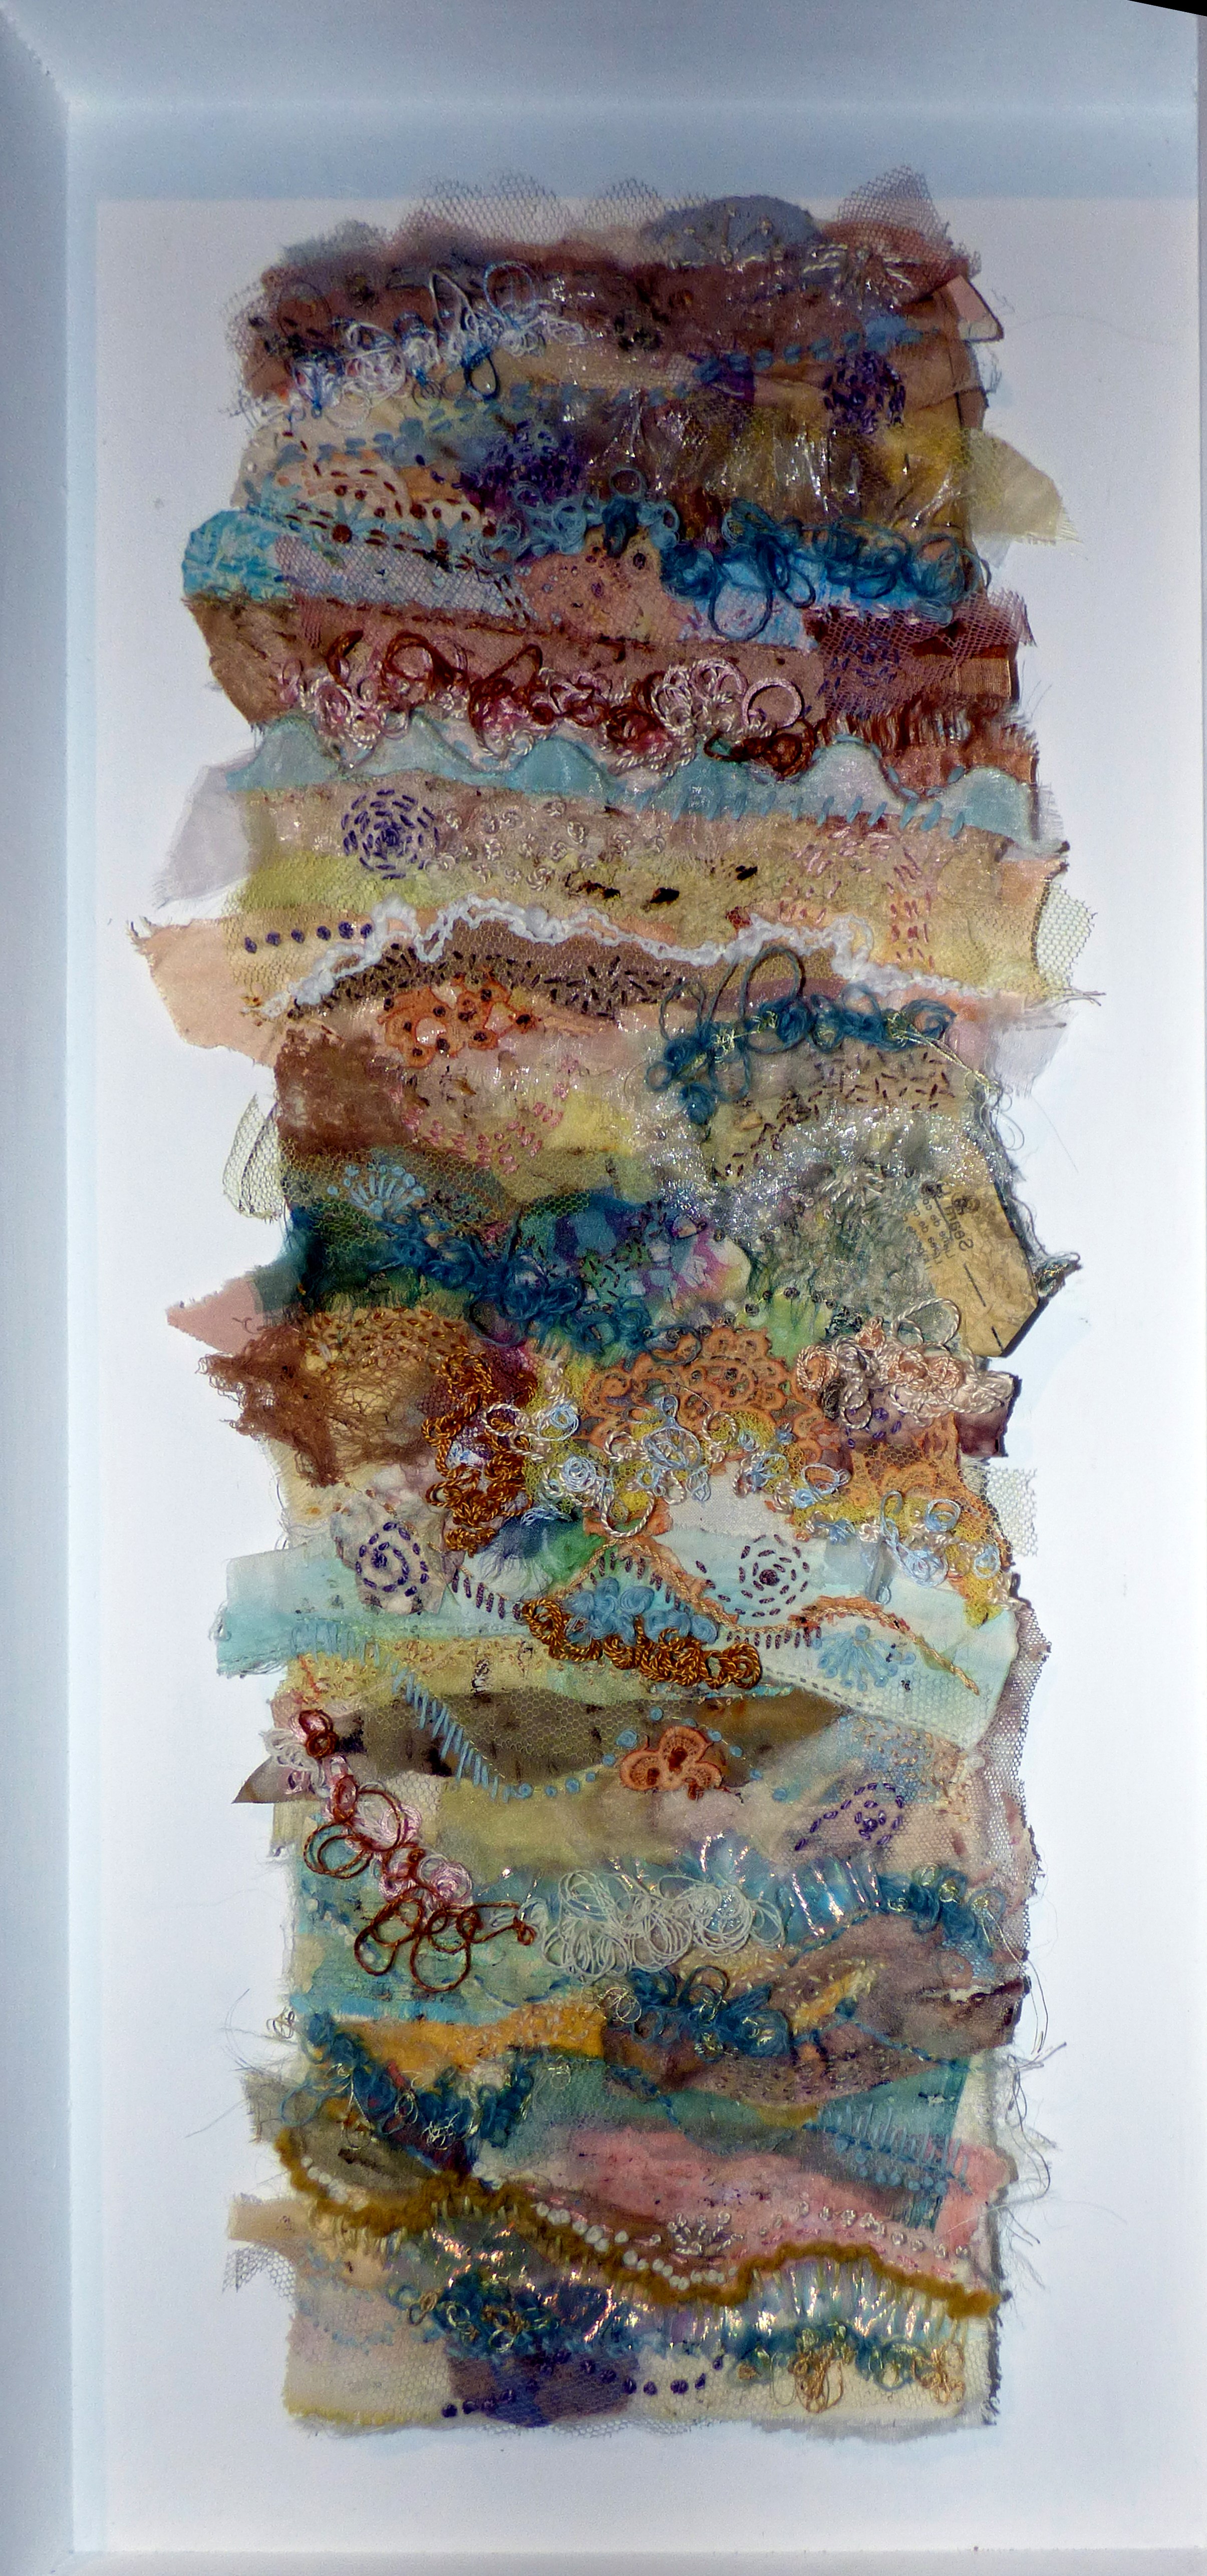 ON THE EDGE OF THE TIDE 2 by Elsa Buch, textiles and mixed media, Textile 21, Chester Cathedral 2019